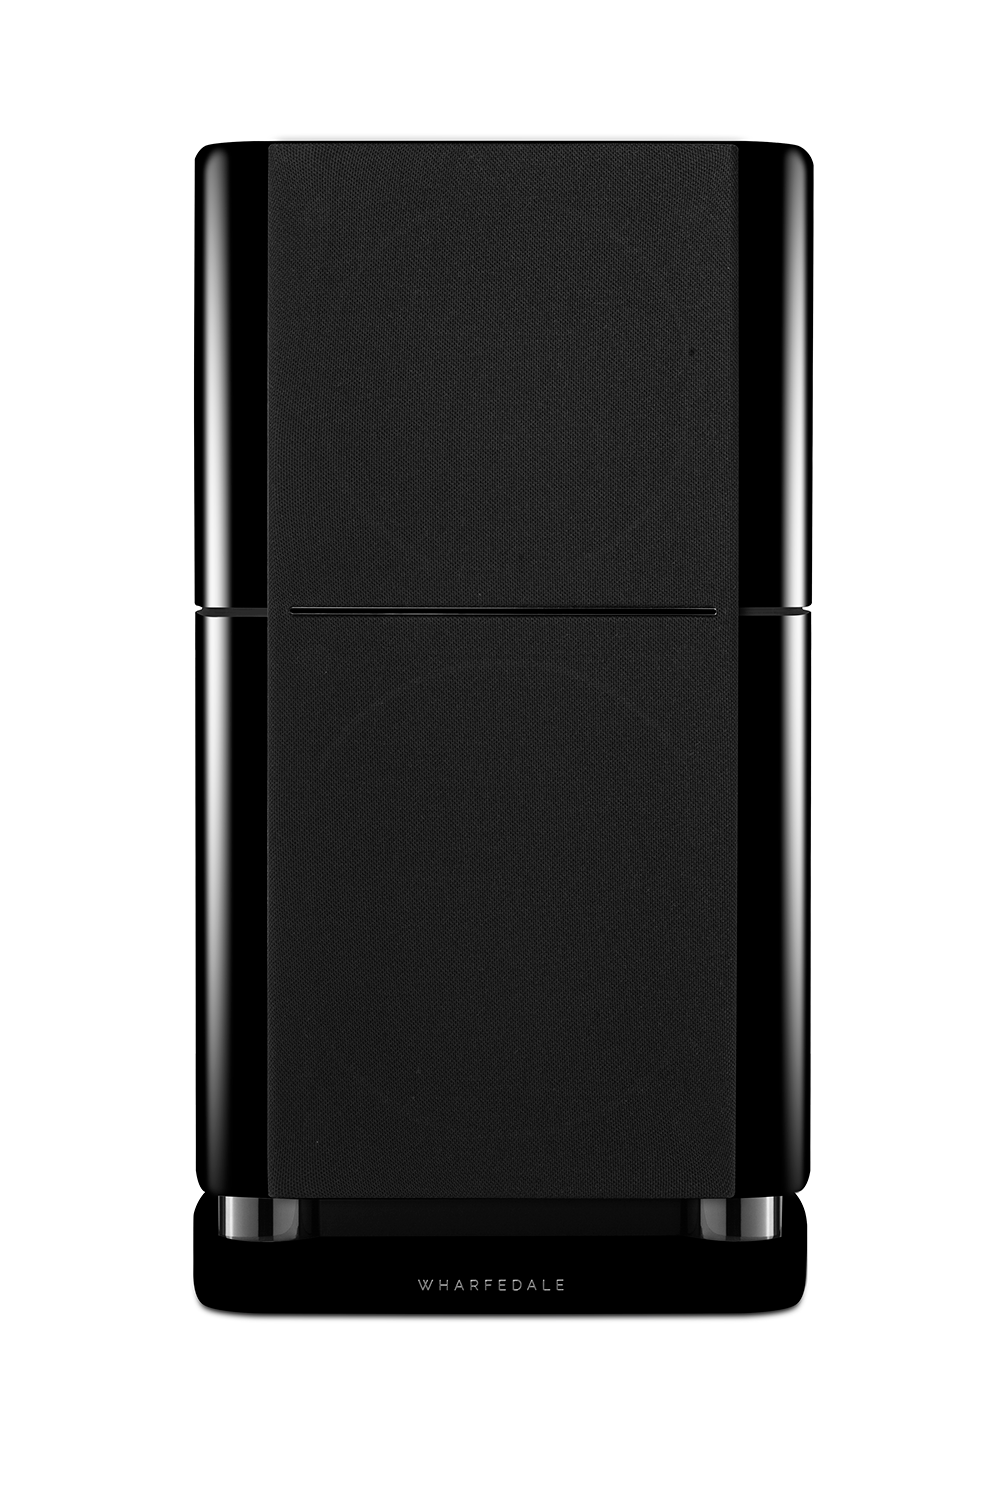 ELYSIAN 1 is the latest addition to the ﬂagship loudspeaker series from Wharfedale, pushing the boundaries of capability and performance. A genuine example of luxury audio, ELYSIAN 1 oﬀers indulgence in design, materials aesthetic, and performance, now in a more compact standmount format. 